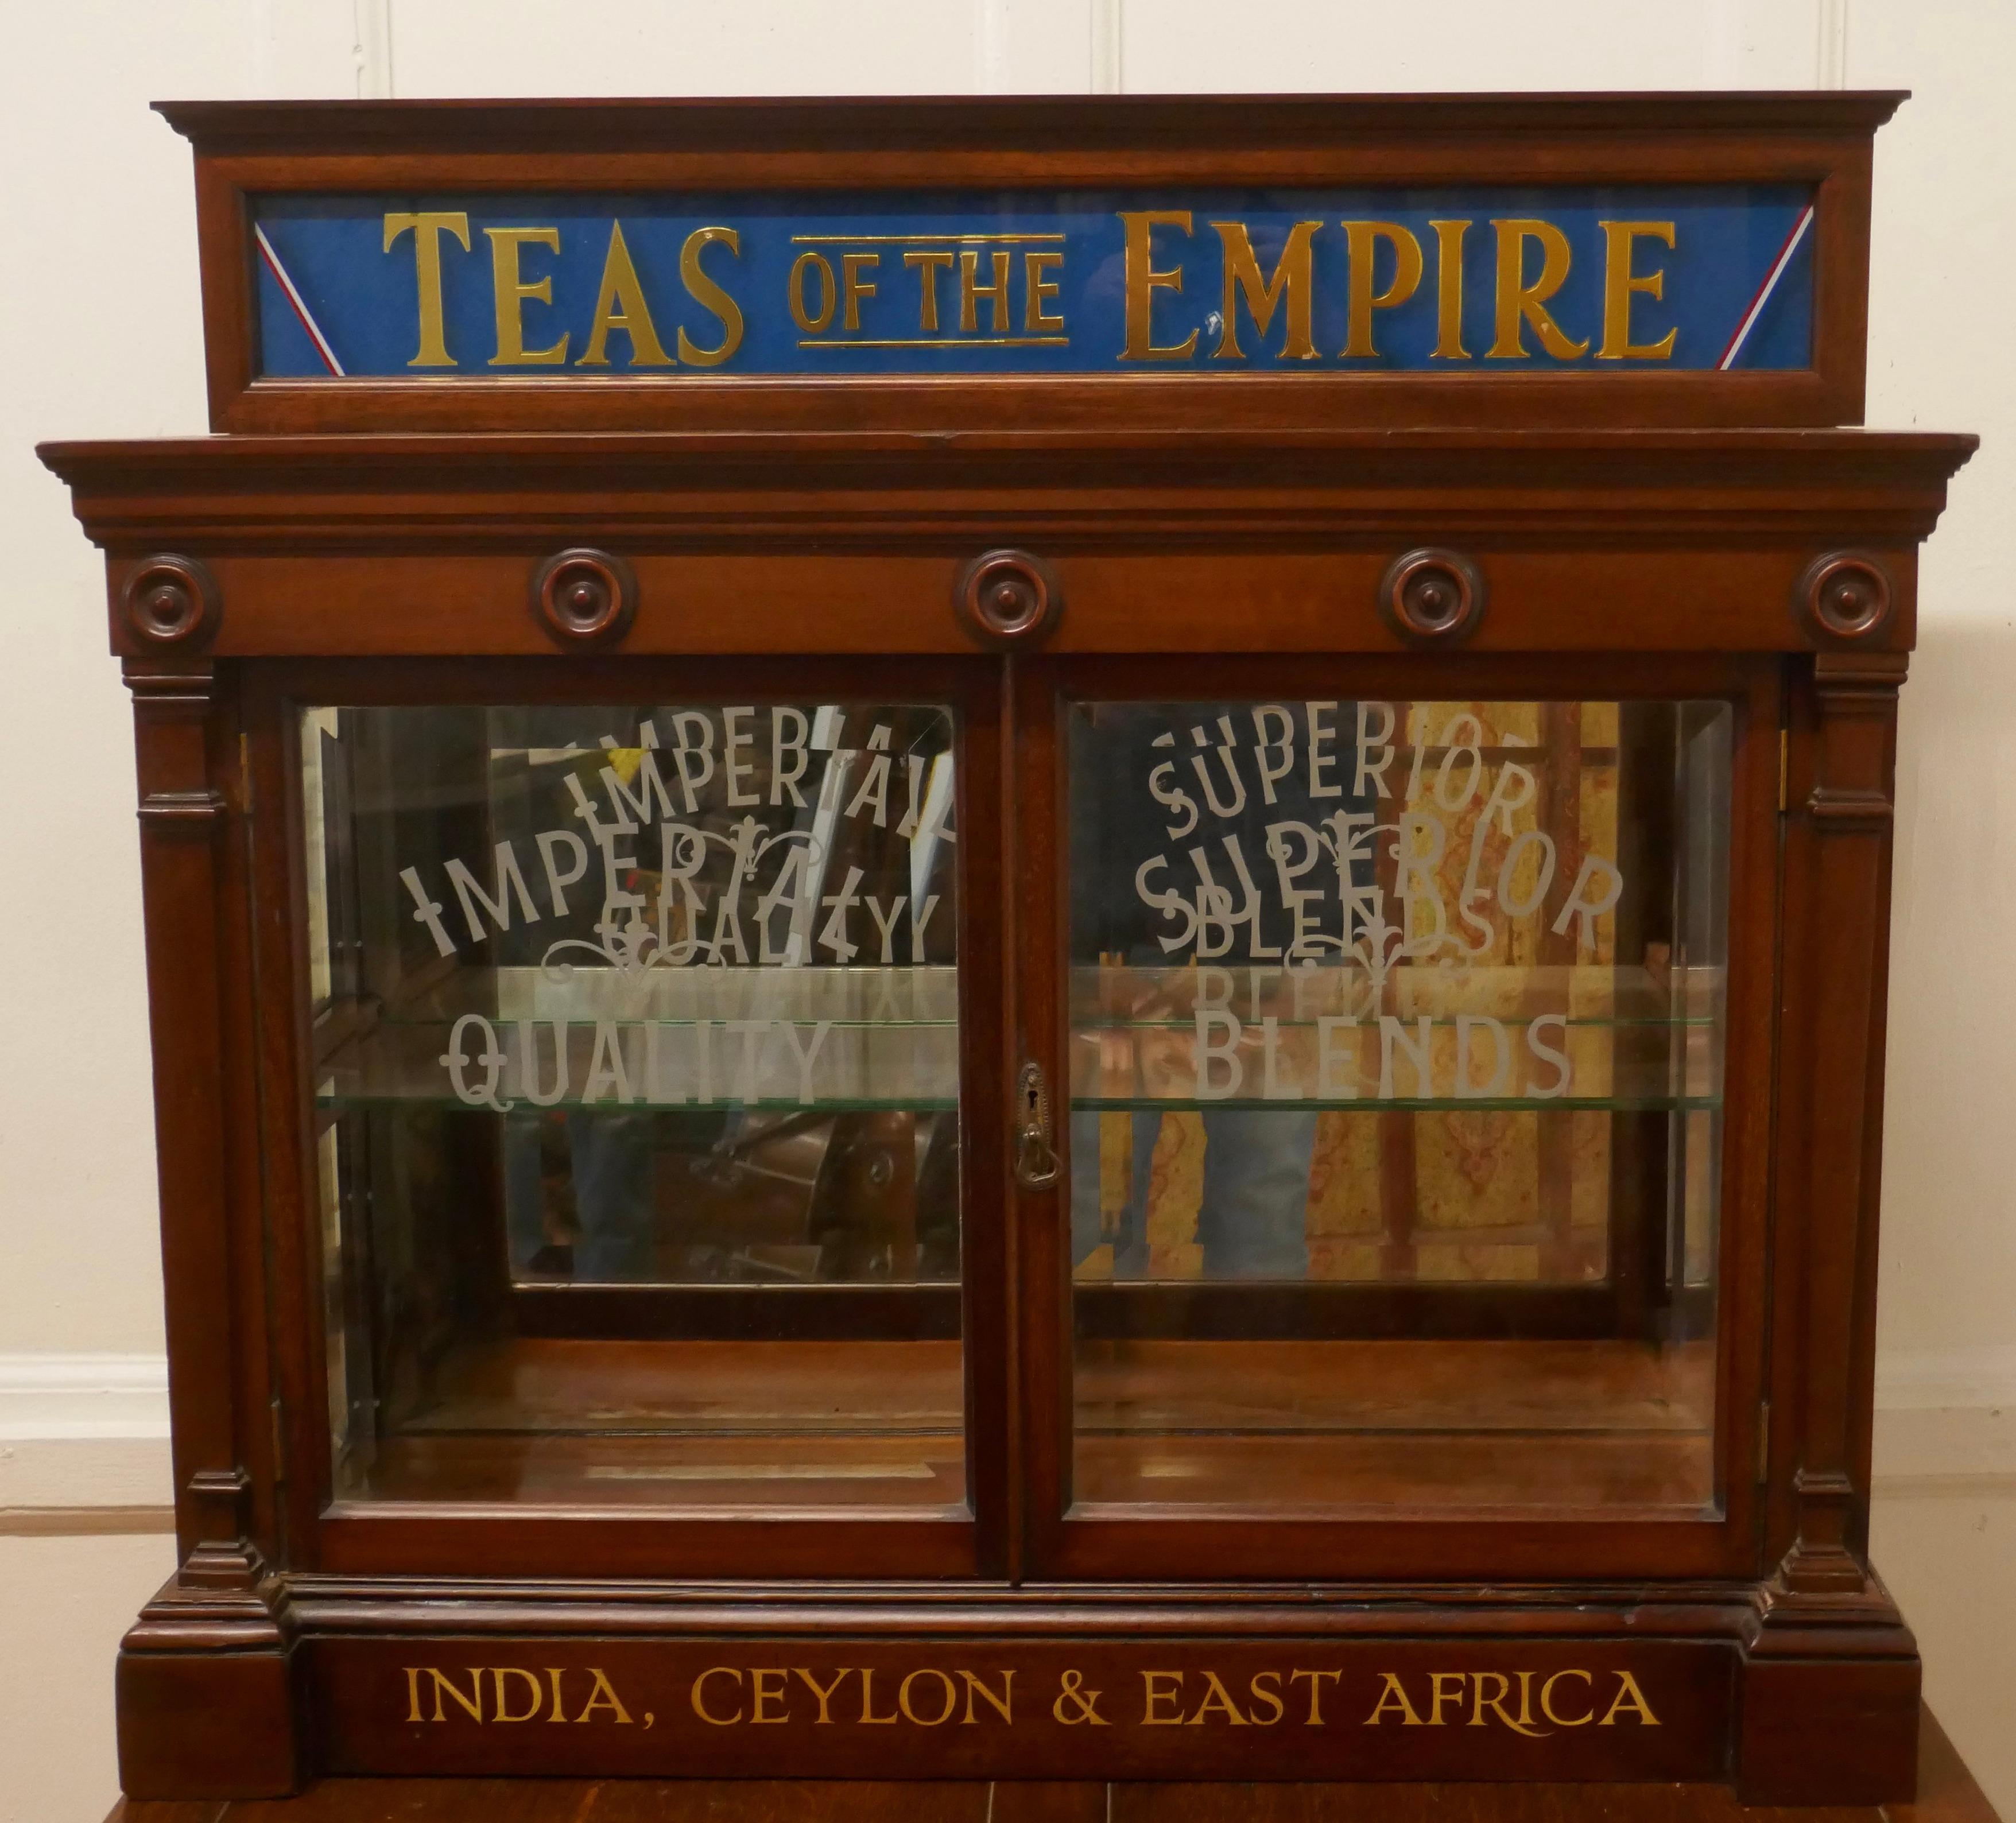  Victorian Empire Tea Cabinet, Tea Room, Cafe Display

A magnificent piece of social history a Victorian Grocers shop cupboard, with a blue mirror cornice and Gold Leaf writing advertising Teas of the Empire
The cupboard can be either wall hung or